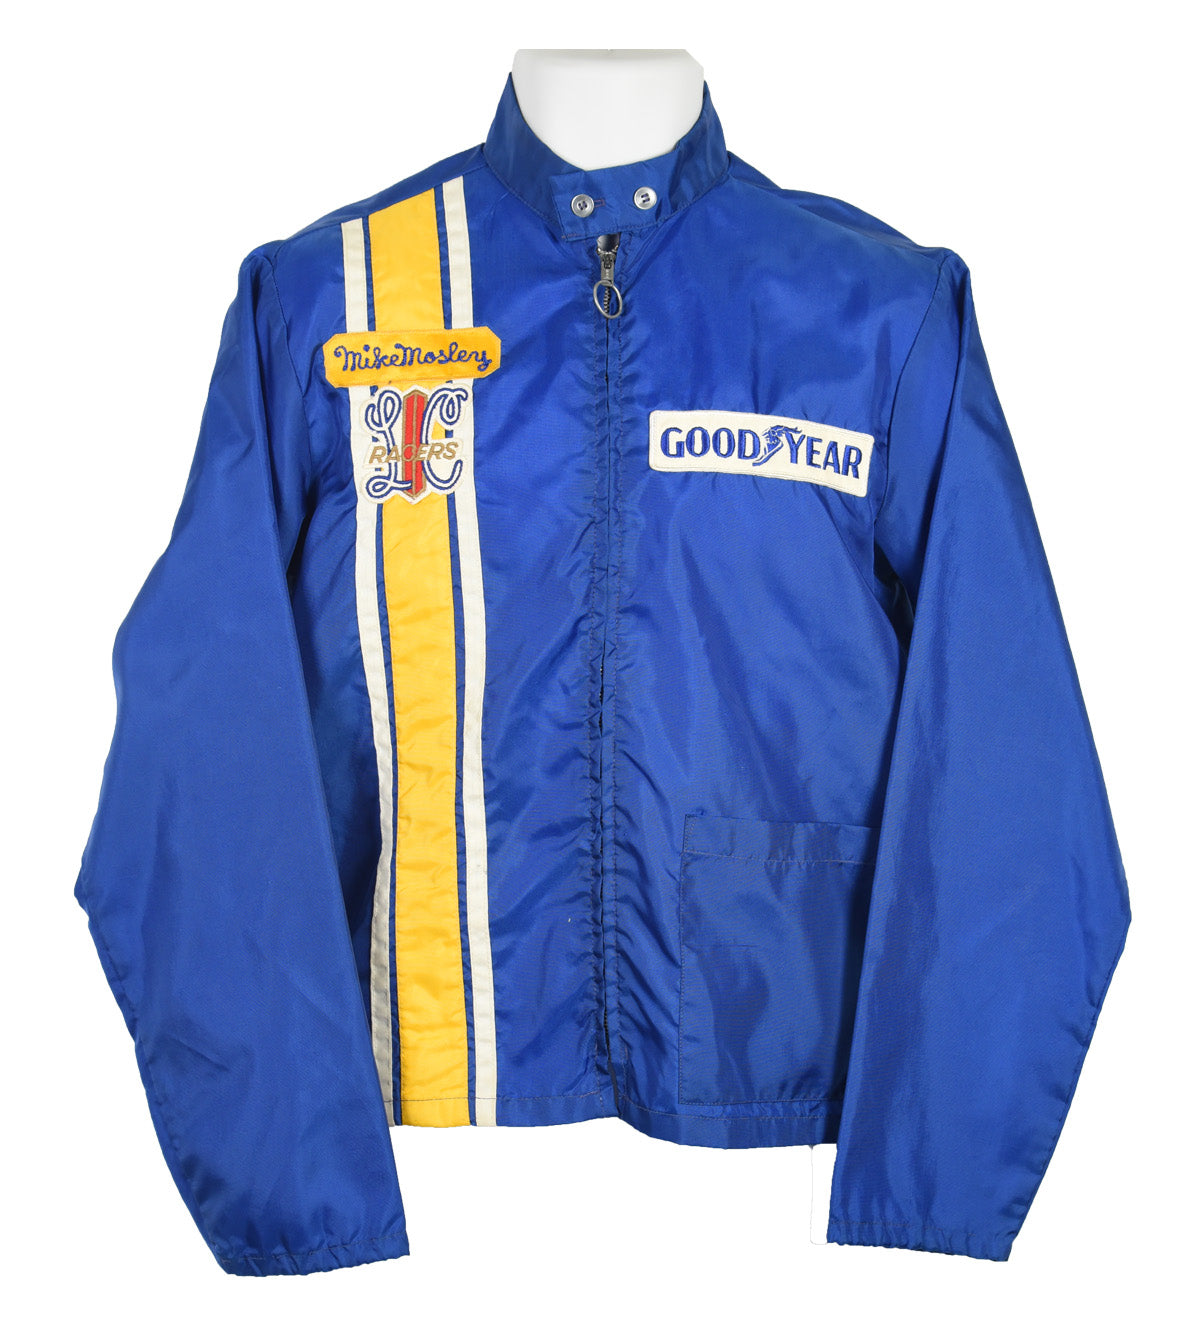 1973/74 Mike Mosley Personally Worn Leader Card Racers Indy 500 Jacket